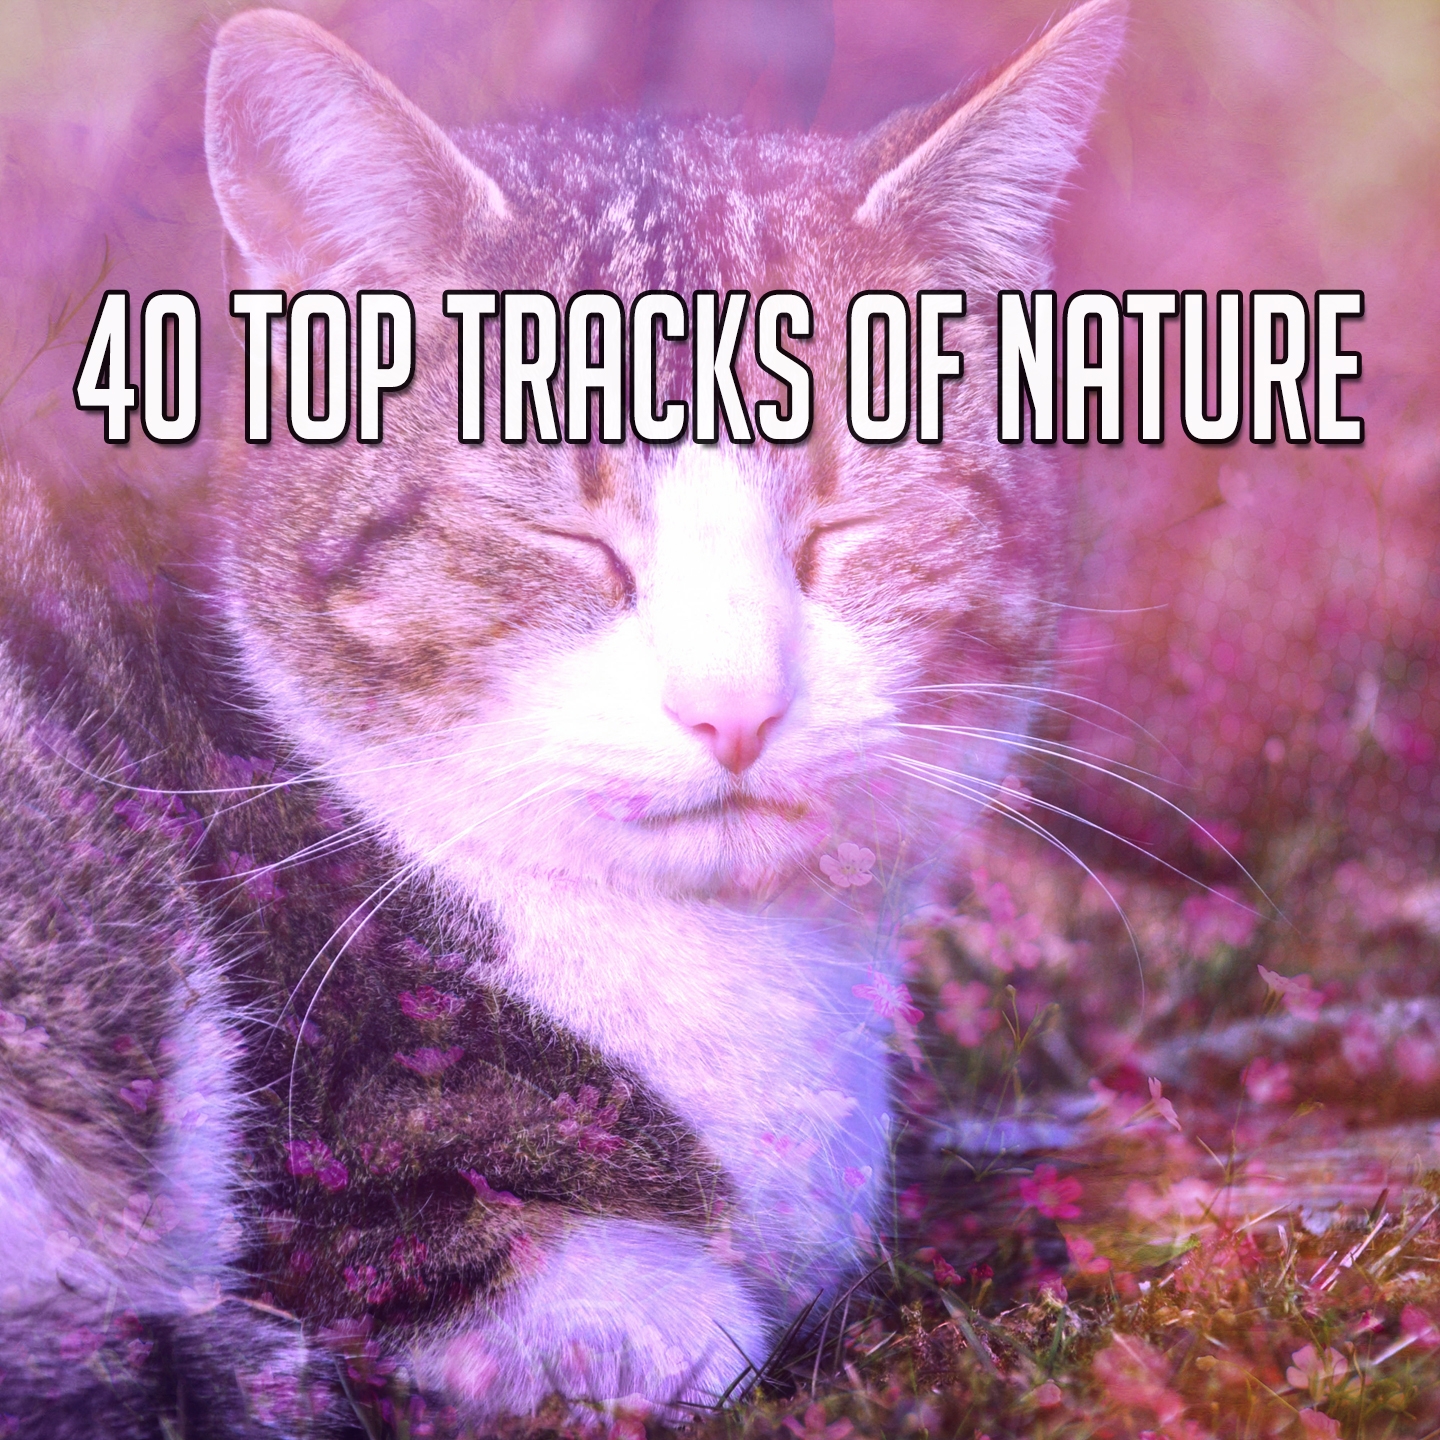 40 Top Tracks Of Nature